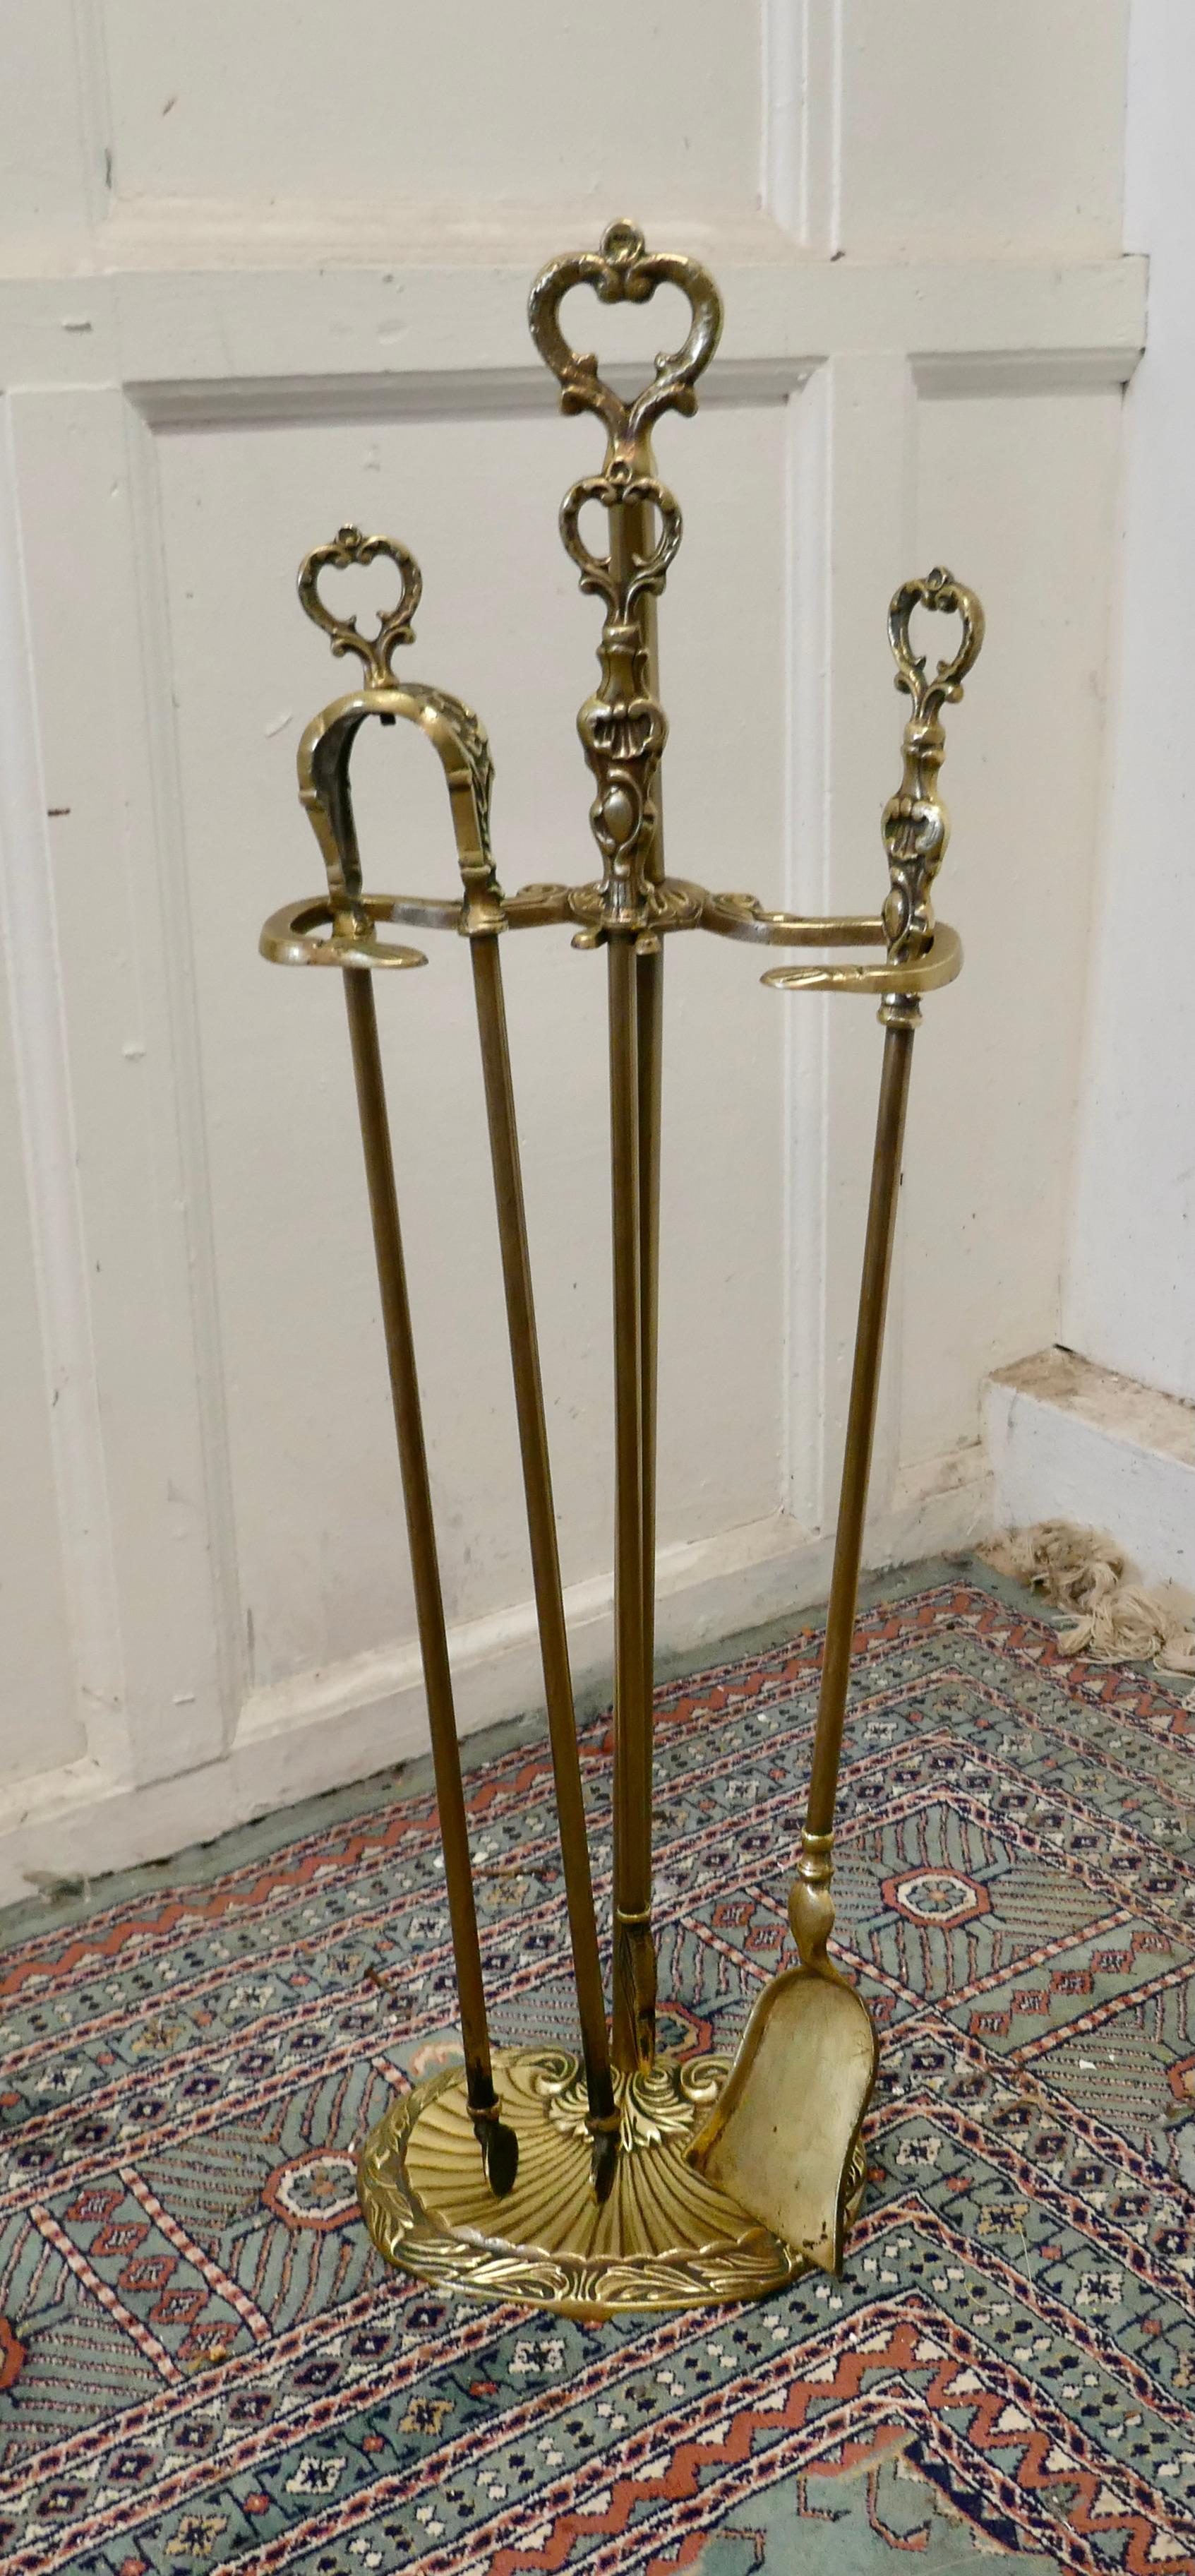 Attractive brass fireside companion set, fireside tools

This is a long handled set on its own stand, shovel, tongs and poker 
Measures: The stand 30” tall, 10” wide and 7” deep
TNV188.
     